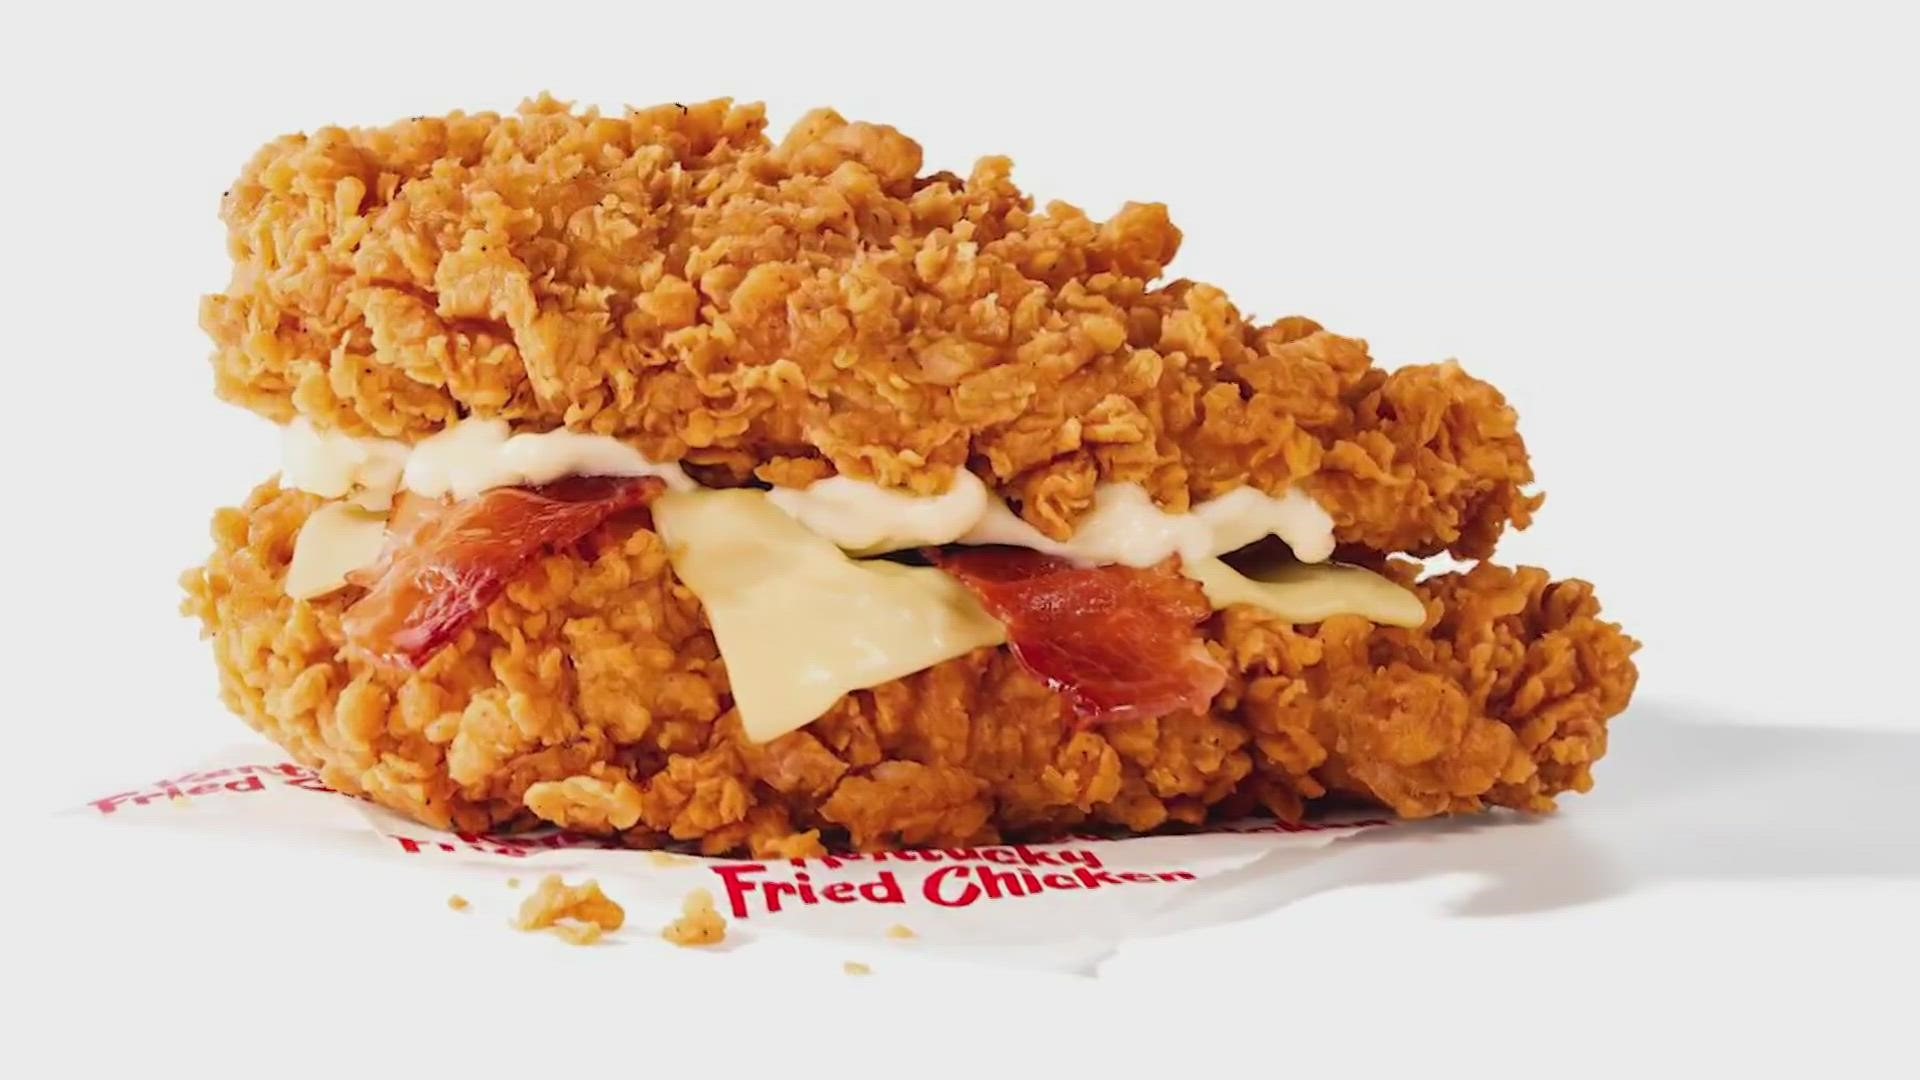 Kentucky Fried Chicken announced it will bring back the KFC Double Down Sandwich for the first time in nearly a decade.